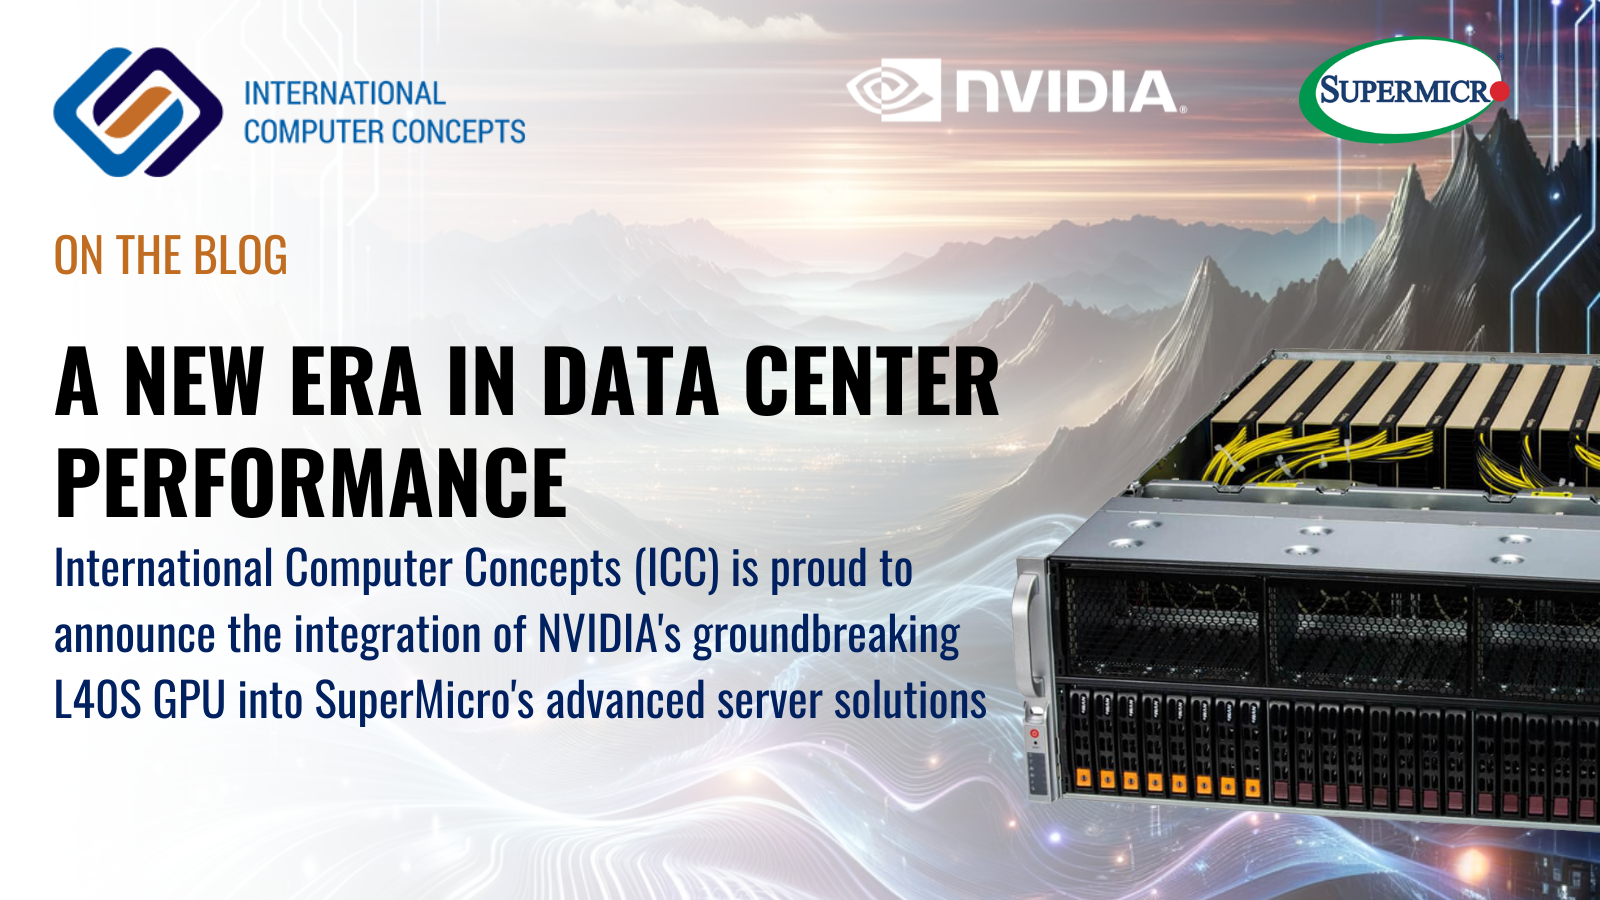 We are proud to announce the integration of NVIDIA's groundbreaking L40S GPU into SuperMicro's advanced server solutions